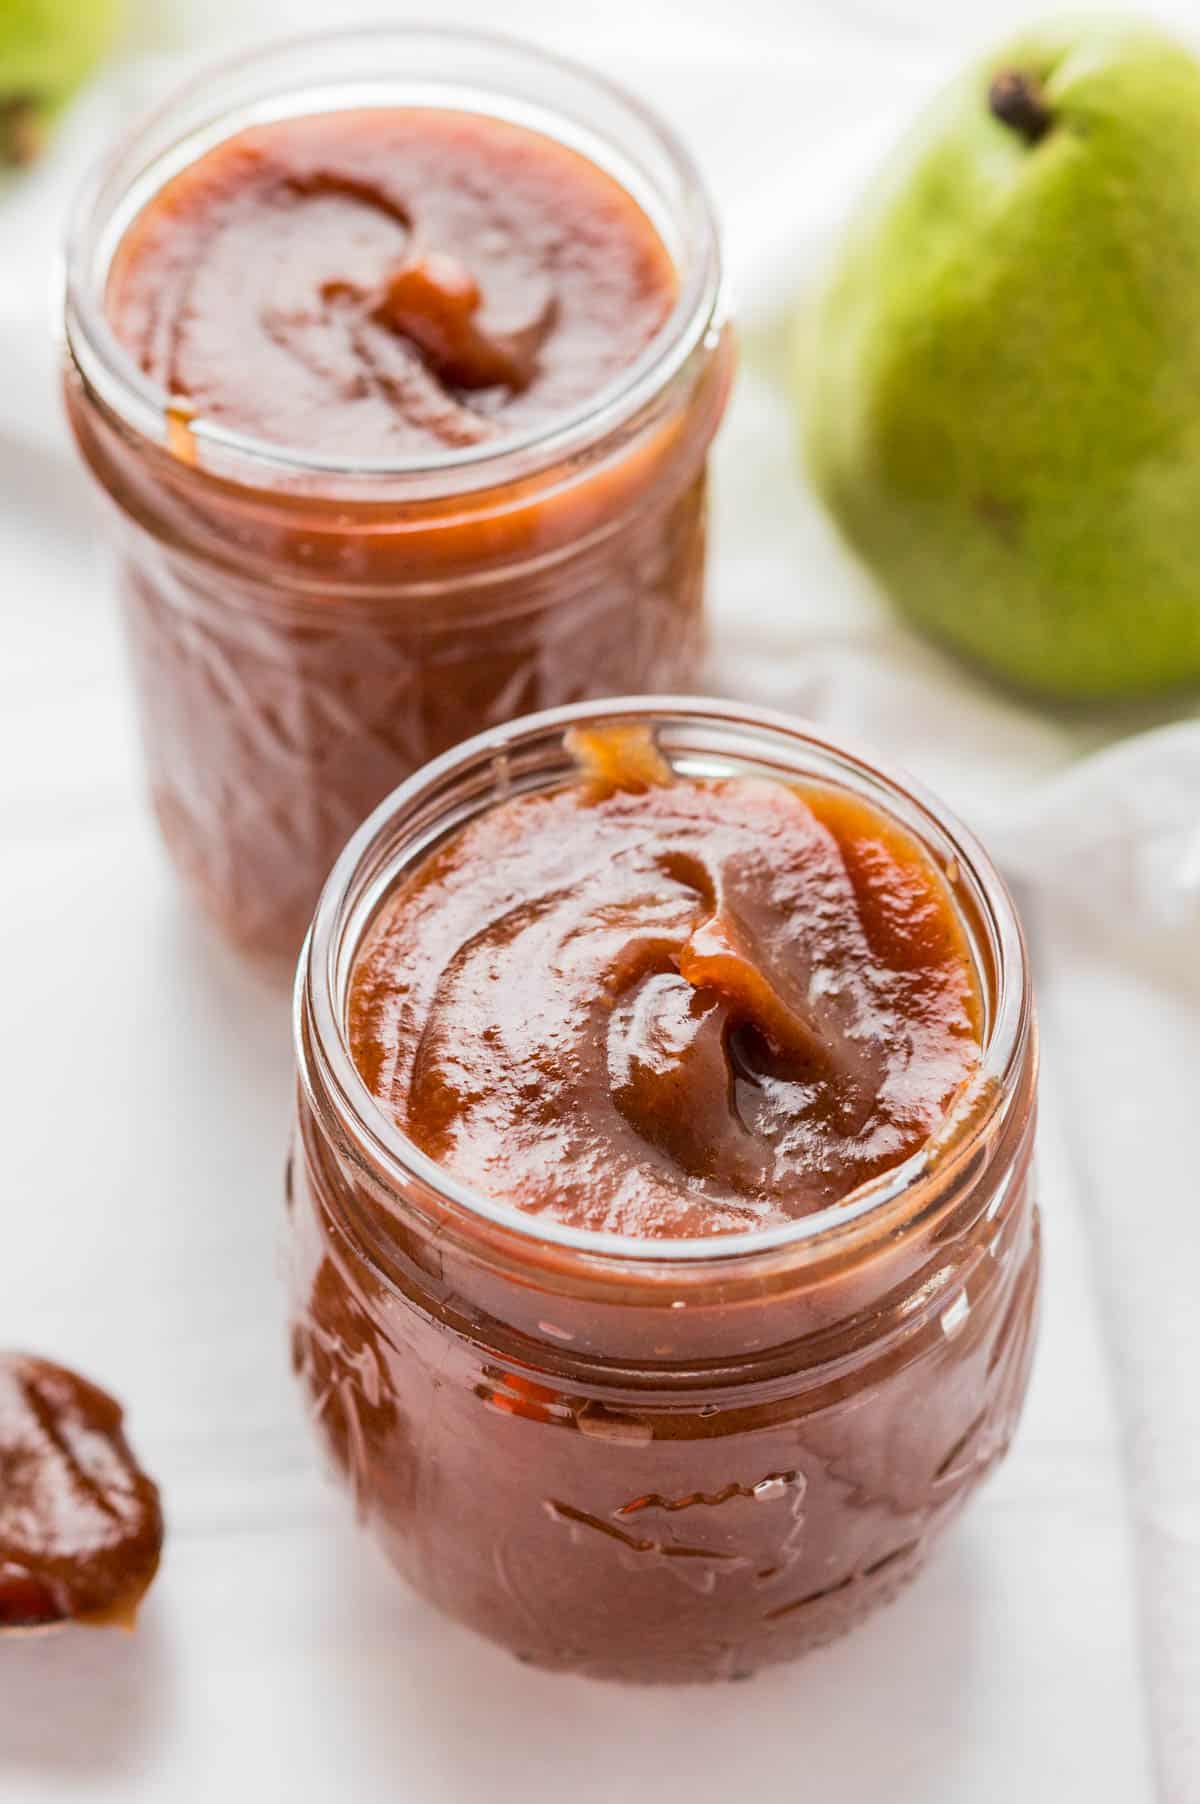 2 jars of spiced pear butter.